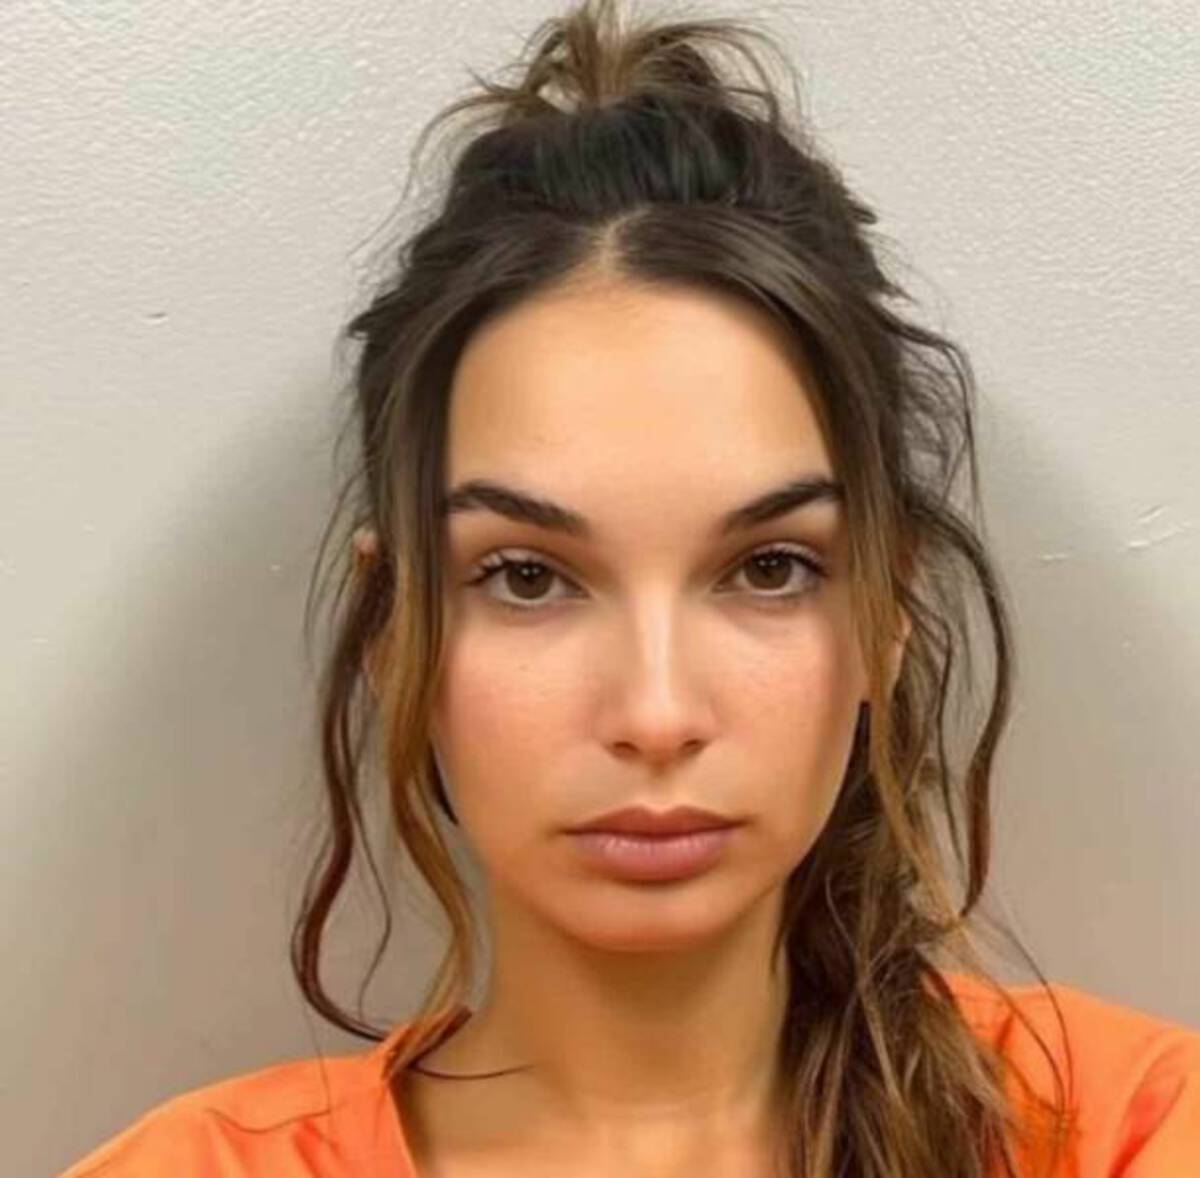 woman's mugshot is now going viral